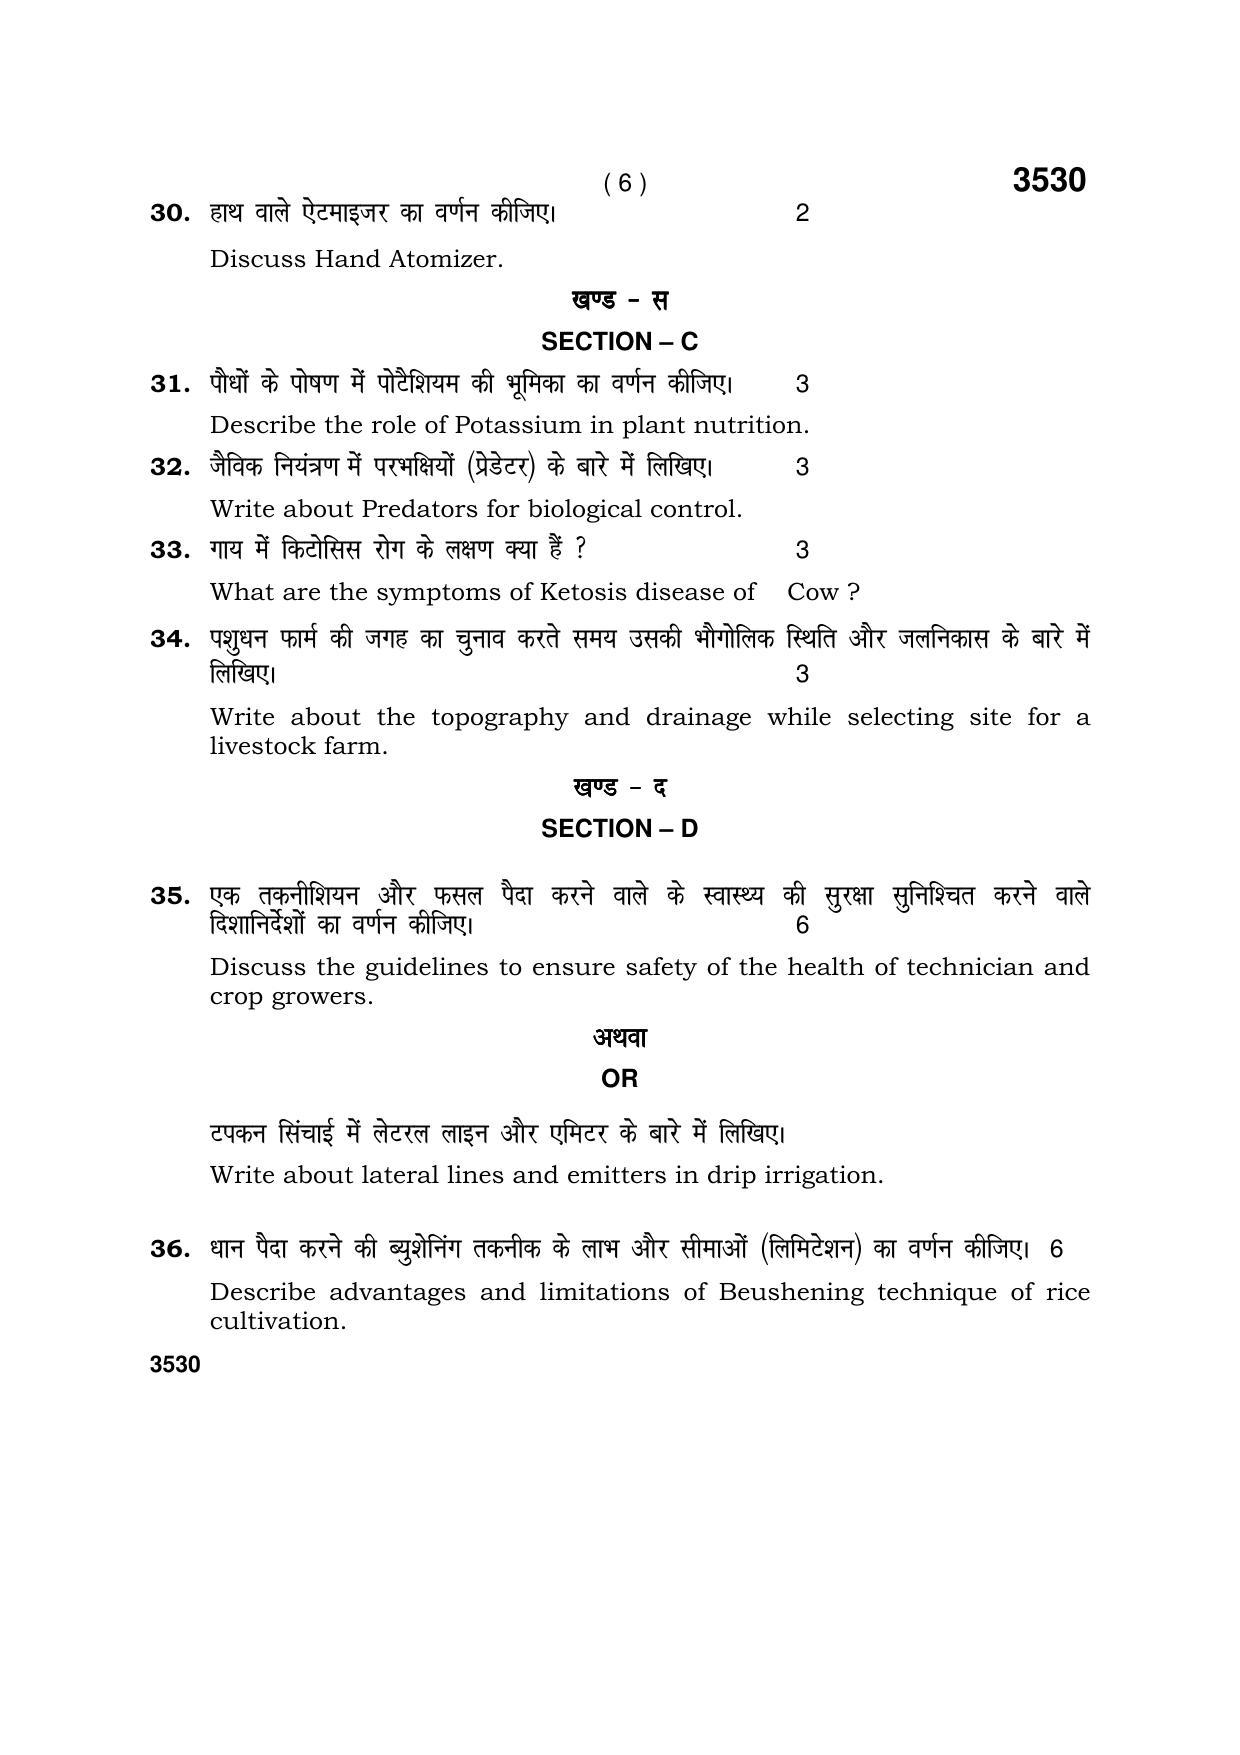 Haryana Board HBSE Class 10 Agriculture Paddy Farming 2018 Question Paper - Page 6